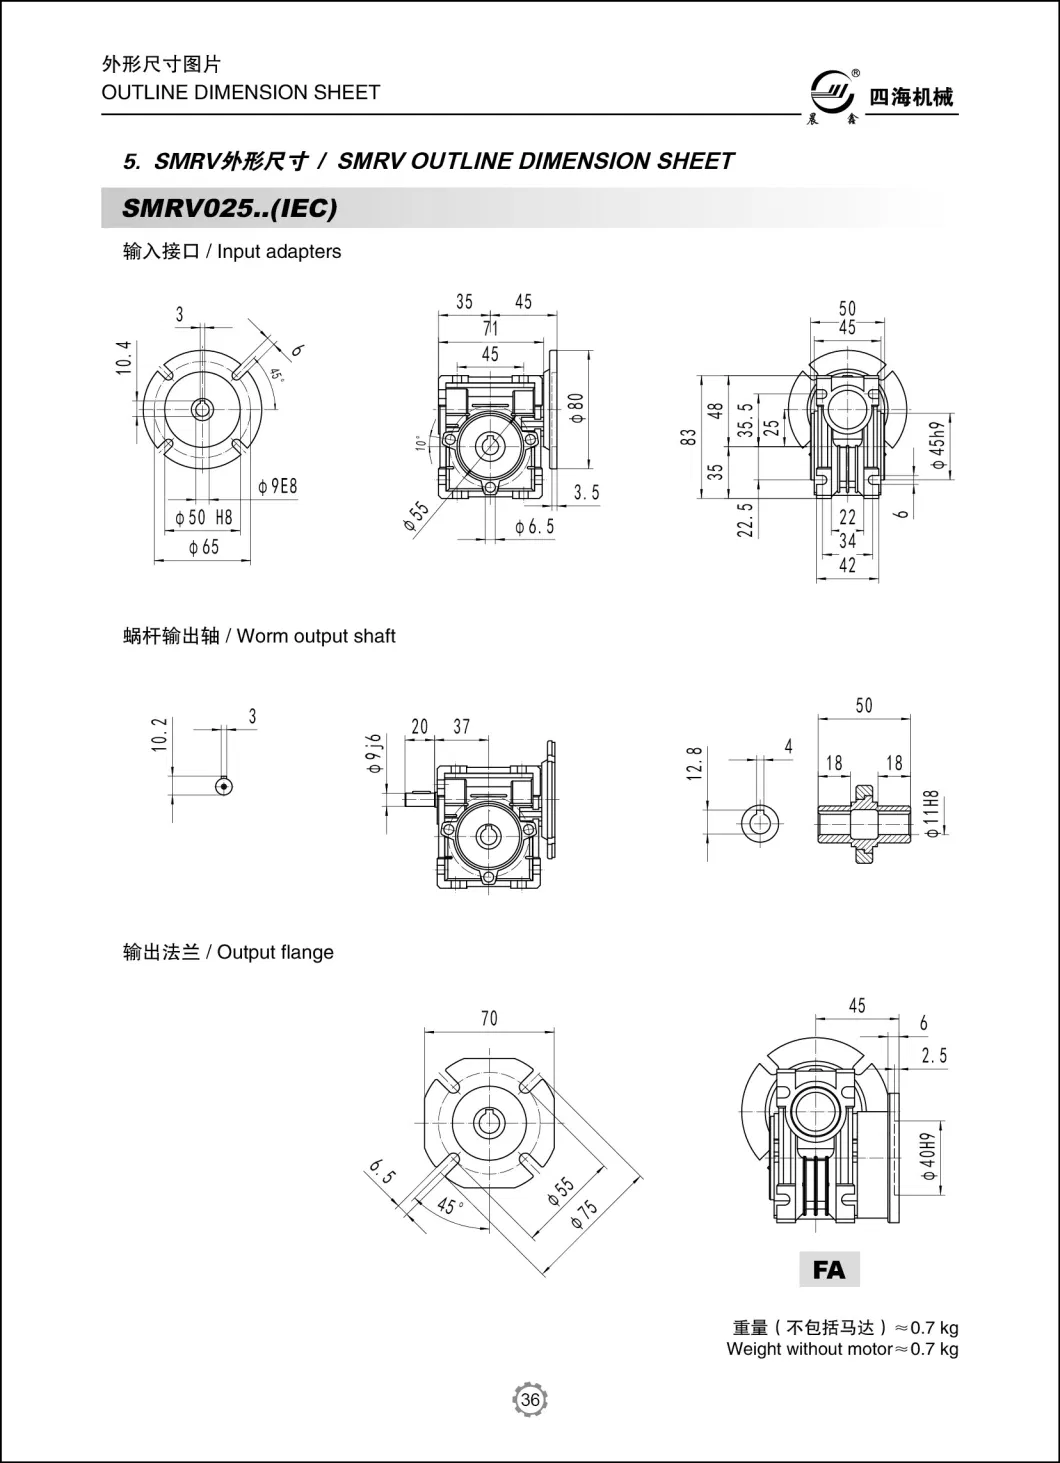 Aluminum Gearbox Cast Iron Housing Transmission Drive Motor Shaft Nmrv Smr Series Reduction Helical Cycloidal Cyclo Planetary Worm Gearboxes Speed Gear Reducer